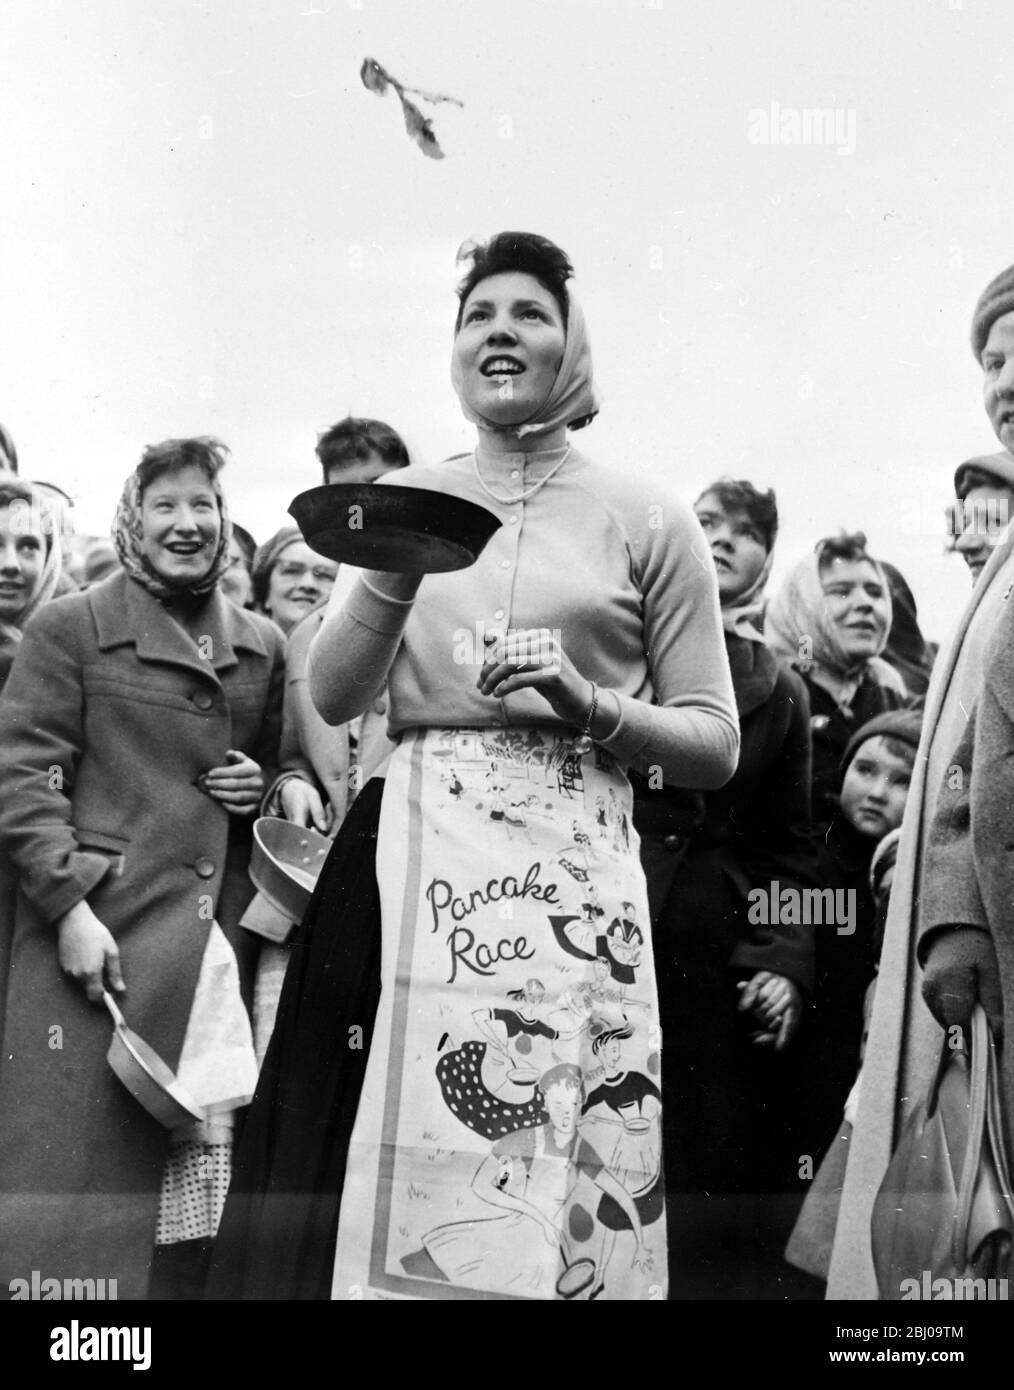 1 MARCH 1960 - CAROL VORLEY - 18 YEAR OLD WINNER OF THE OLNEY PANCAKE RACE FLIPS A PANCAKE AT THE FINISHING LINE AFTER COMPLETING THE 415 YARD COURSE IN 1 MINUTE AND 10 SECONDS. THE RACE DATES BACK TO 1445 AND WAS REVIVED BY THE LOCAL VICAR IN 1946. - OLNEY, BUCKINGHAMSHIRE, ENGLAND Stock Photo